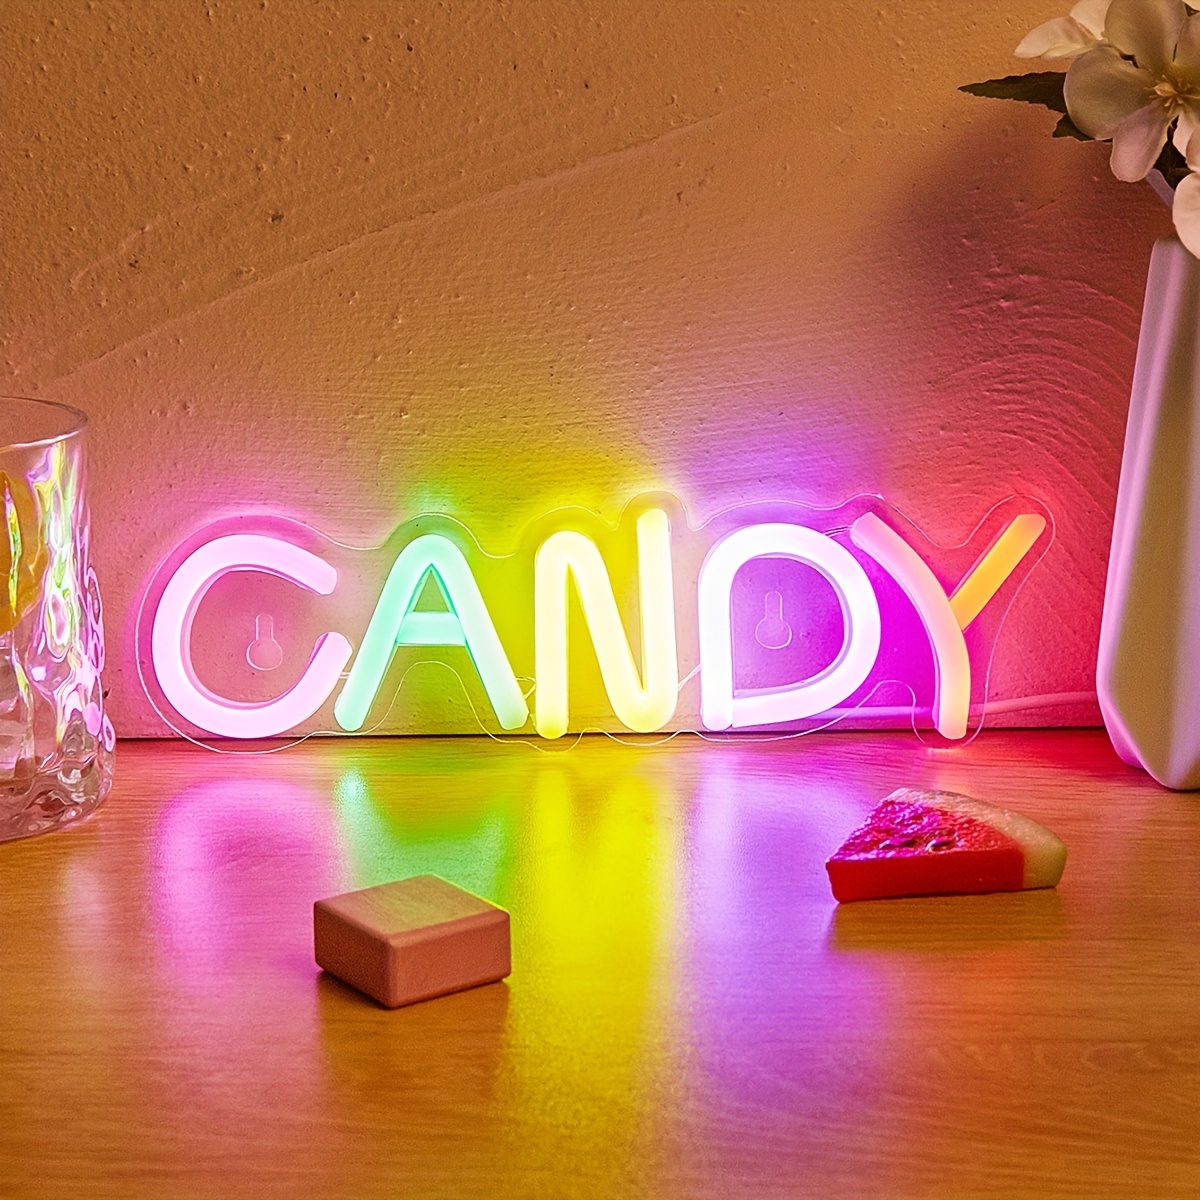 

1pc Candy Led Neon Sign For Wall And Table Decor, Light Up Signs Usb Powered Neon Lights Signs, For Bedroom Kids Room Bar Wedding Party Decoration